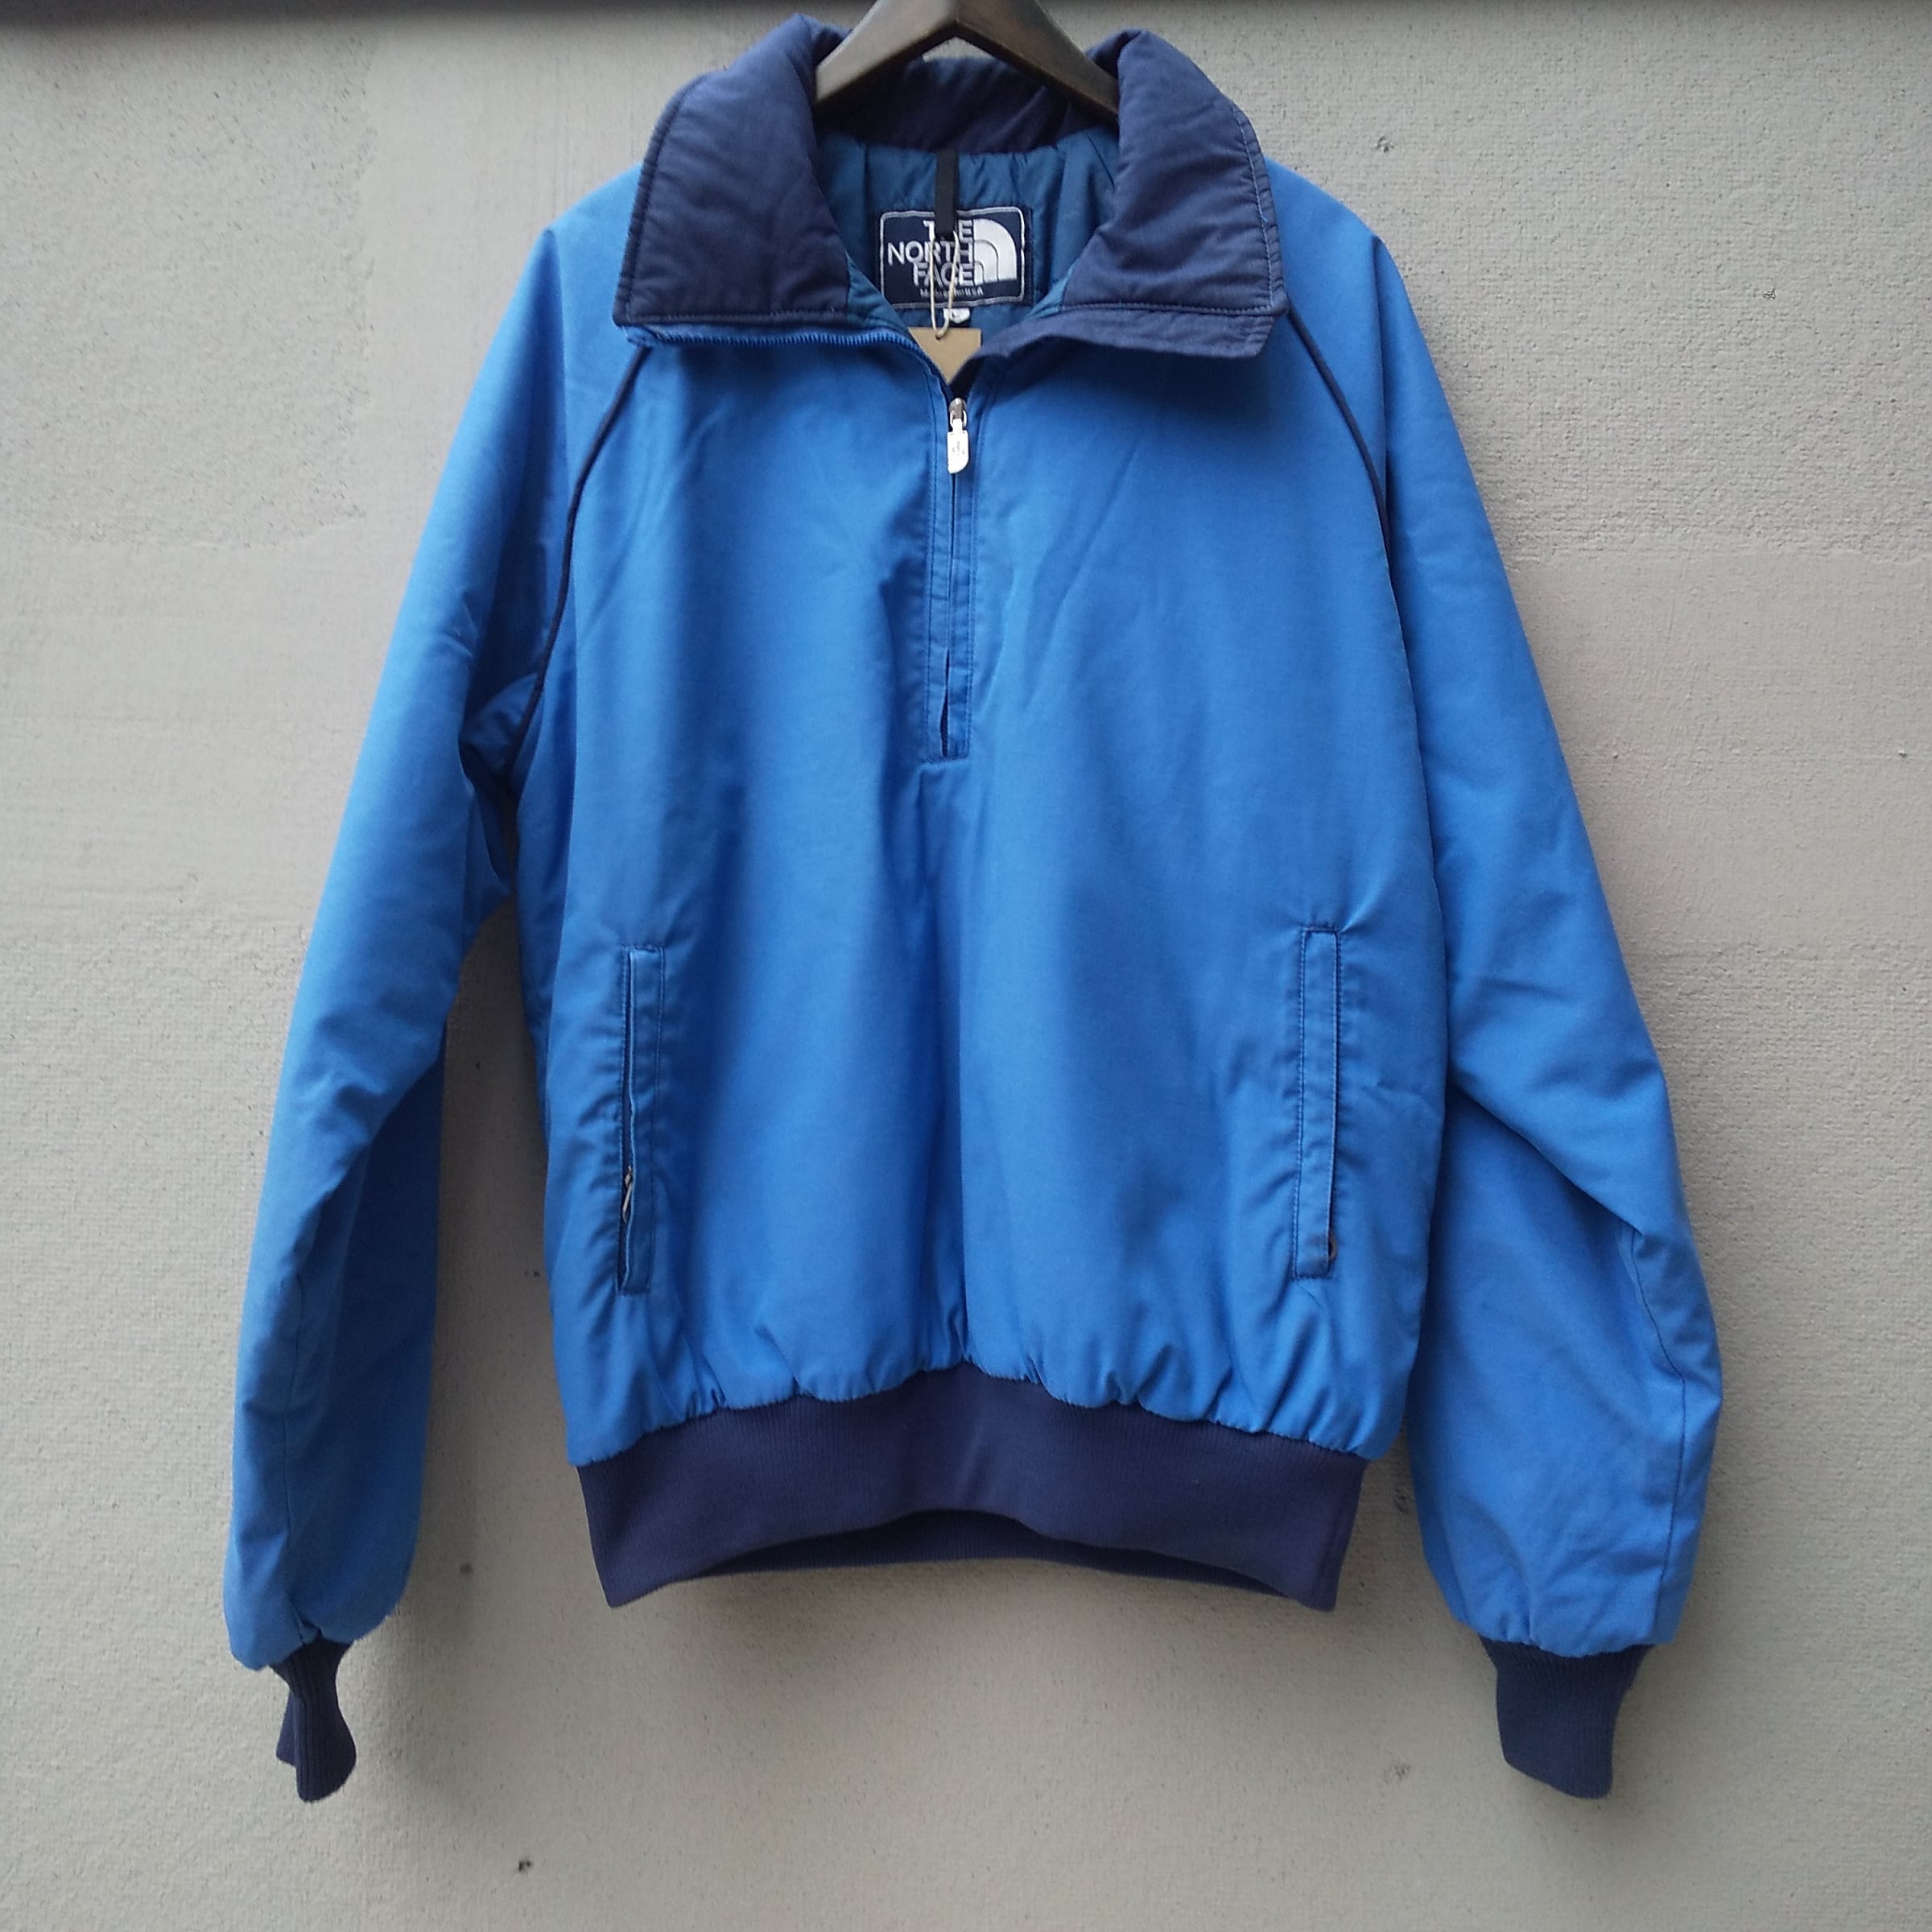 THE NORTH FACE ナイロンジャケット Made in USA-